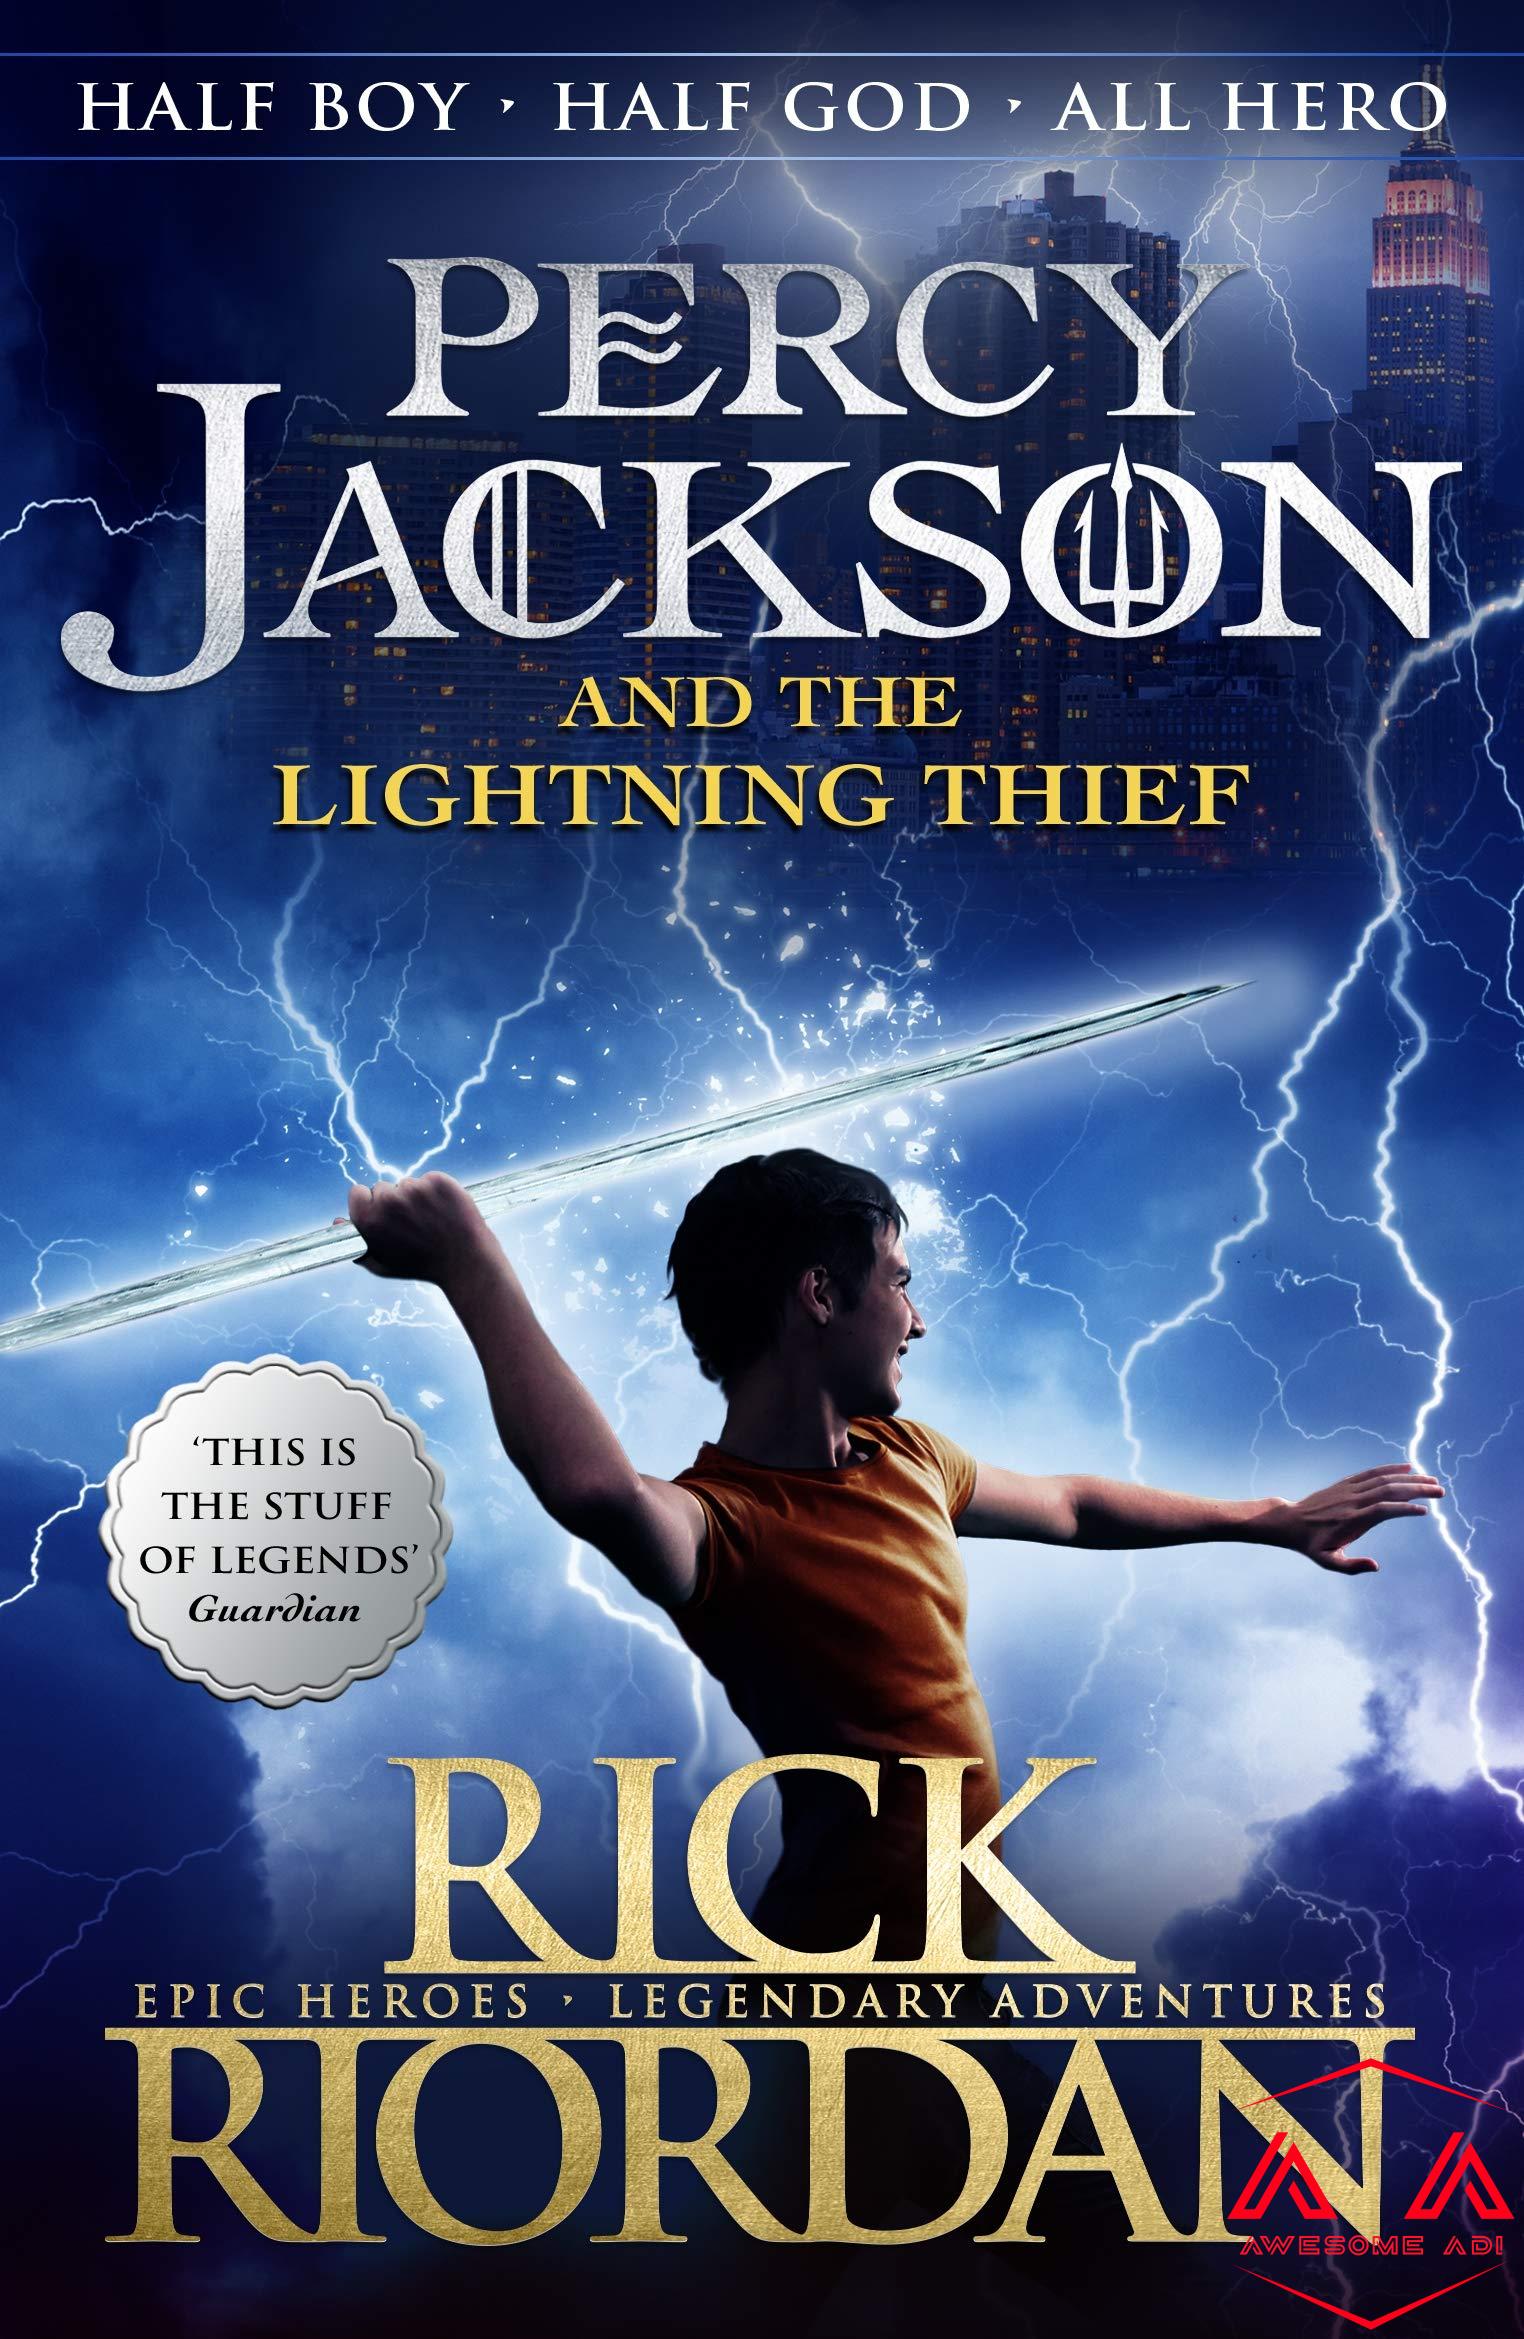 percy jackson and the lightning thief book review essay